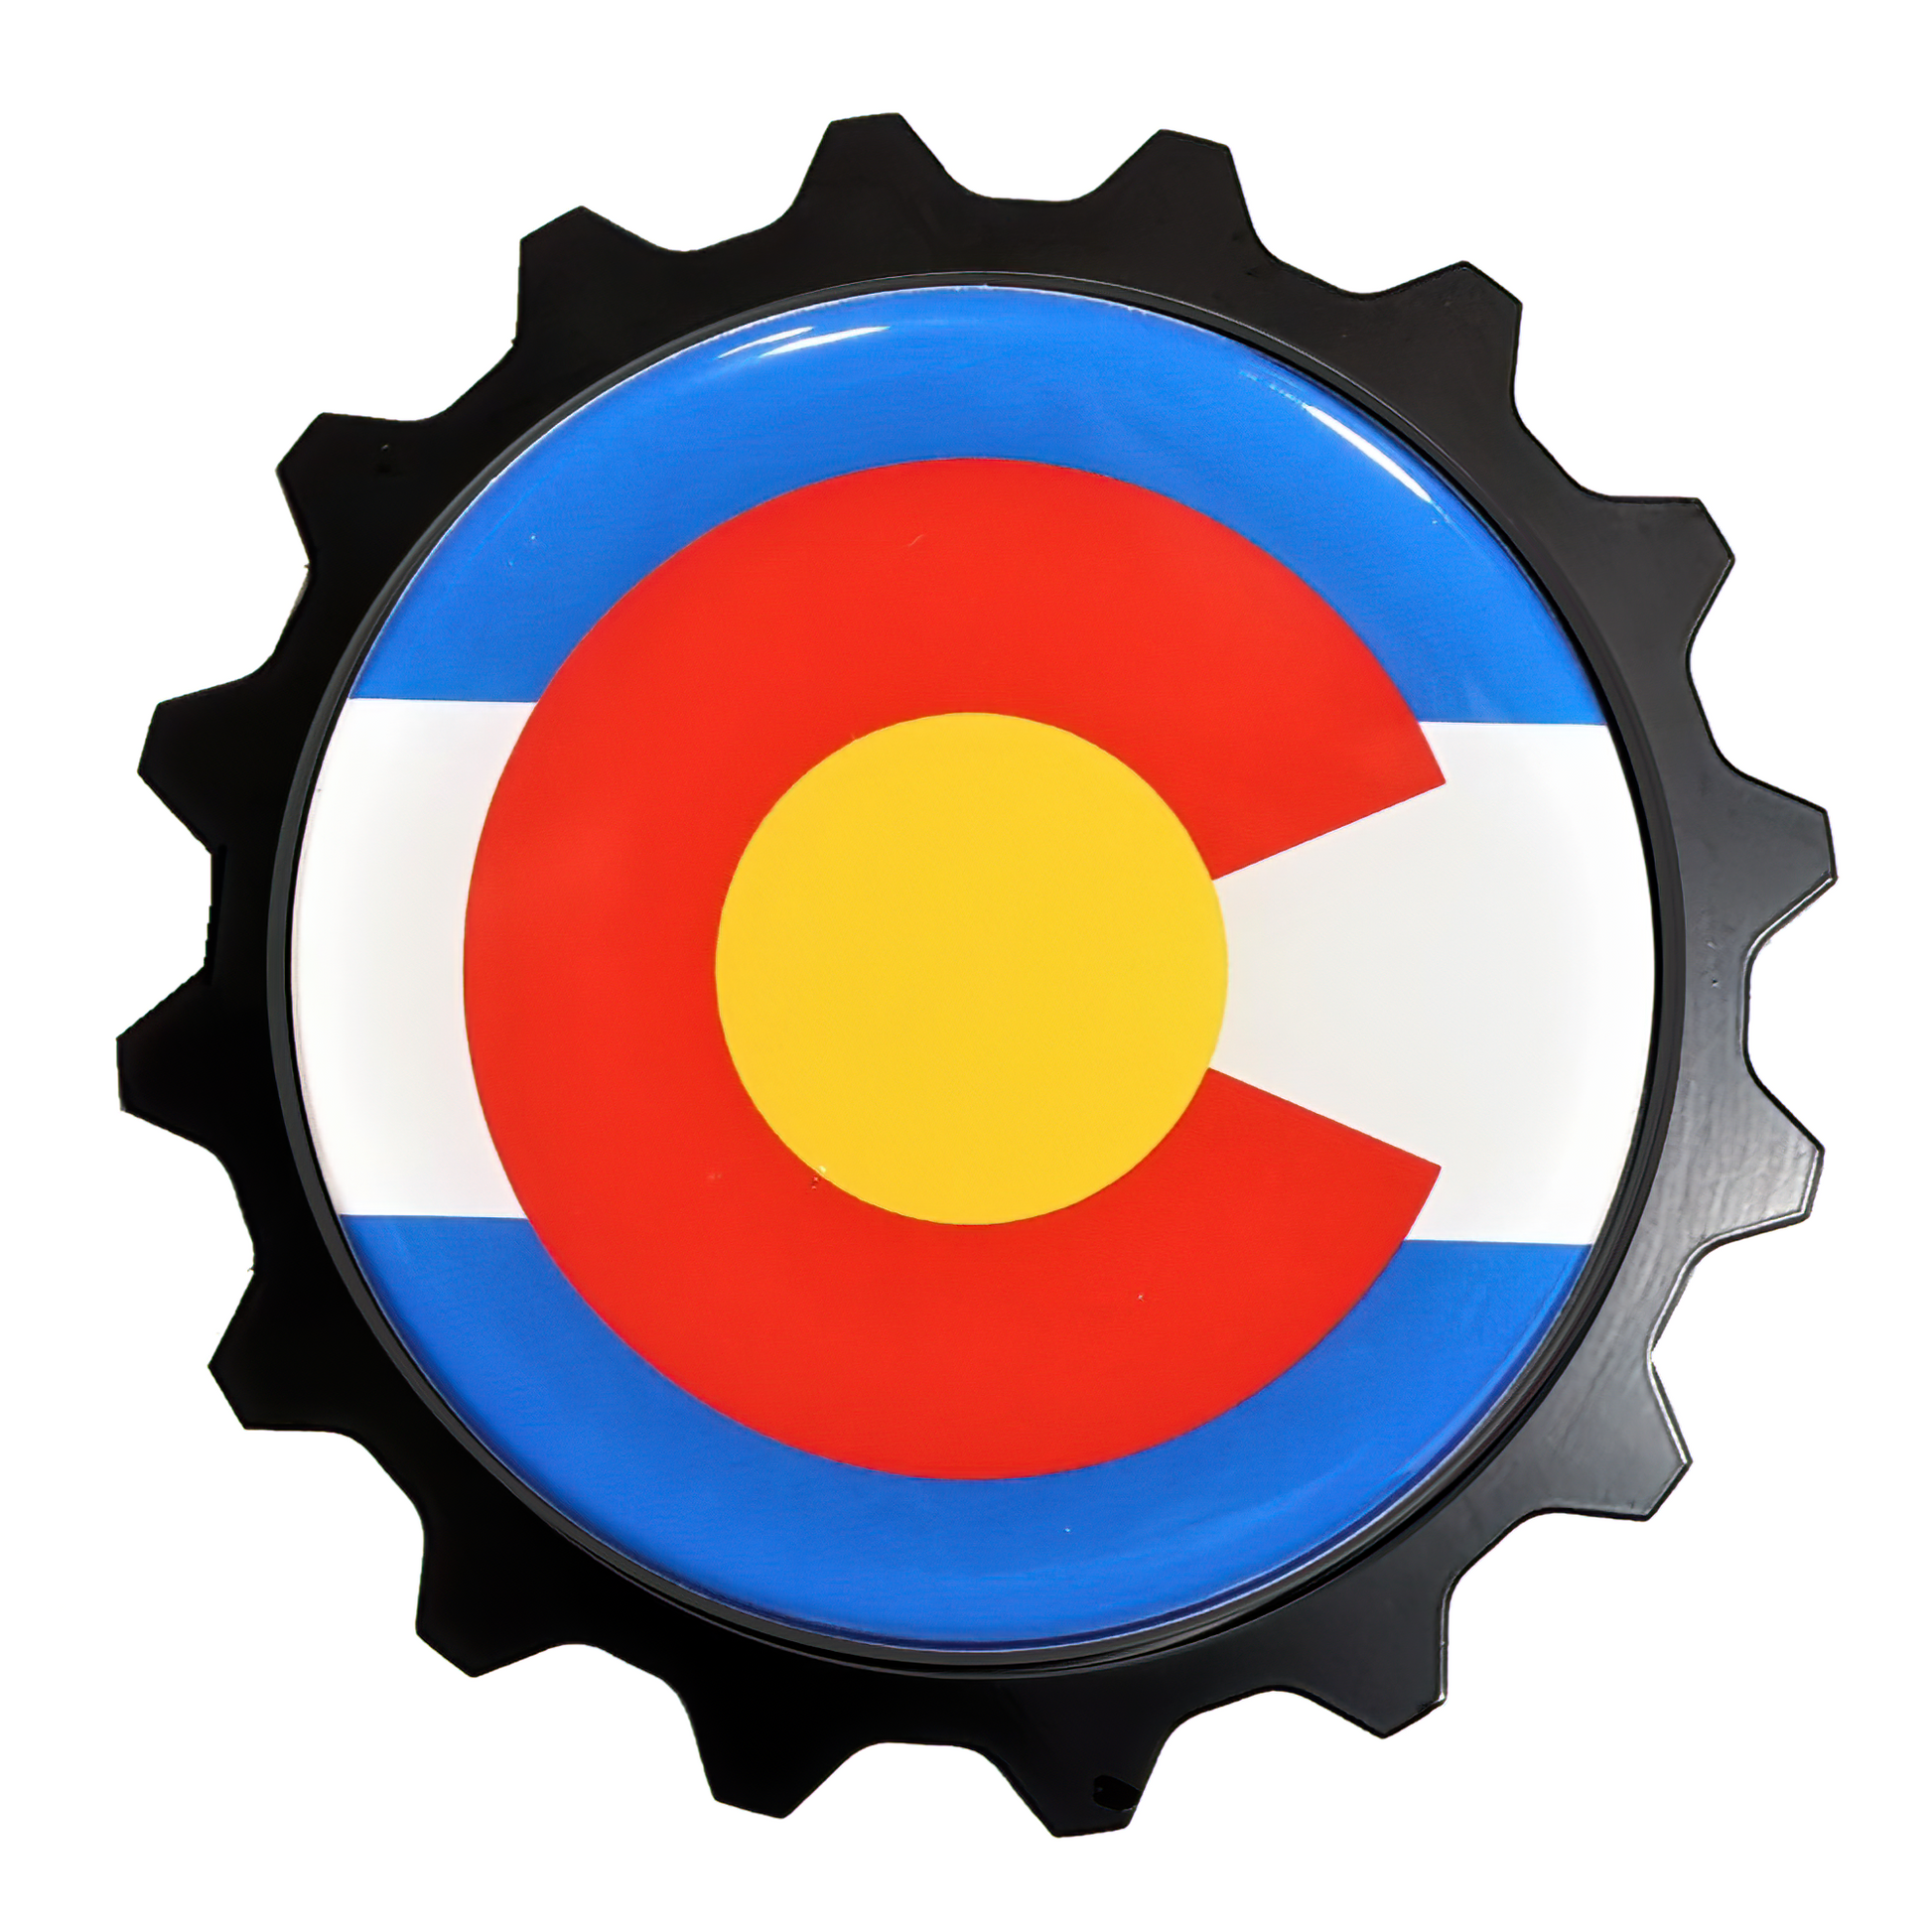 Colorado Flag Emblem Badge, often used by 4x4 or car clubs so the group has a similar identifier on the grille. These badge kits look great on Toyota, Jeep, Bronco, Ram & Nissan trucks